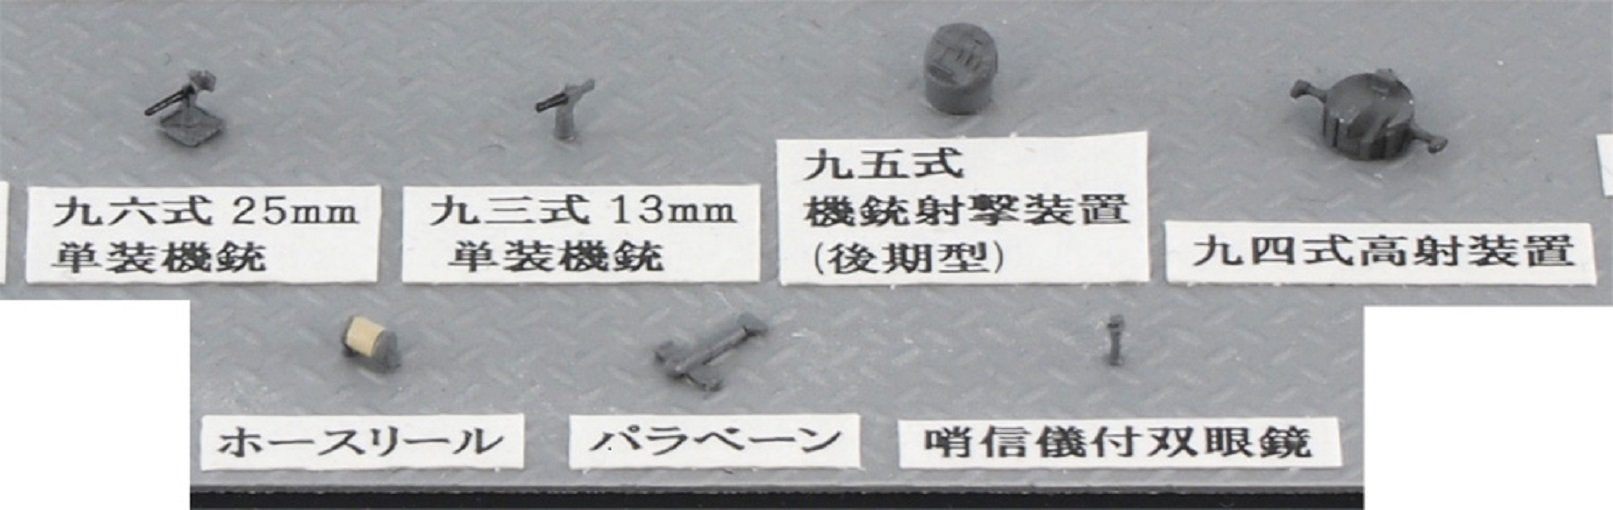 PIT-ROAD Skywave Ne-06 Equipment For Japanese Navy 6 Ships-Wwii 1/700 Scale Kit